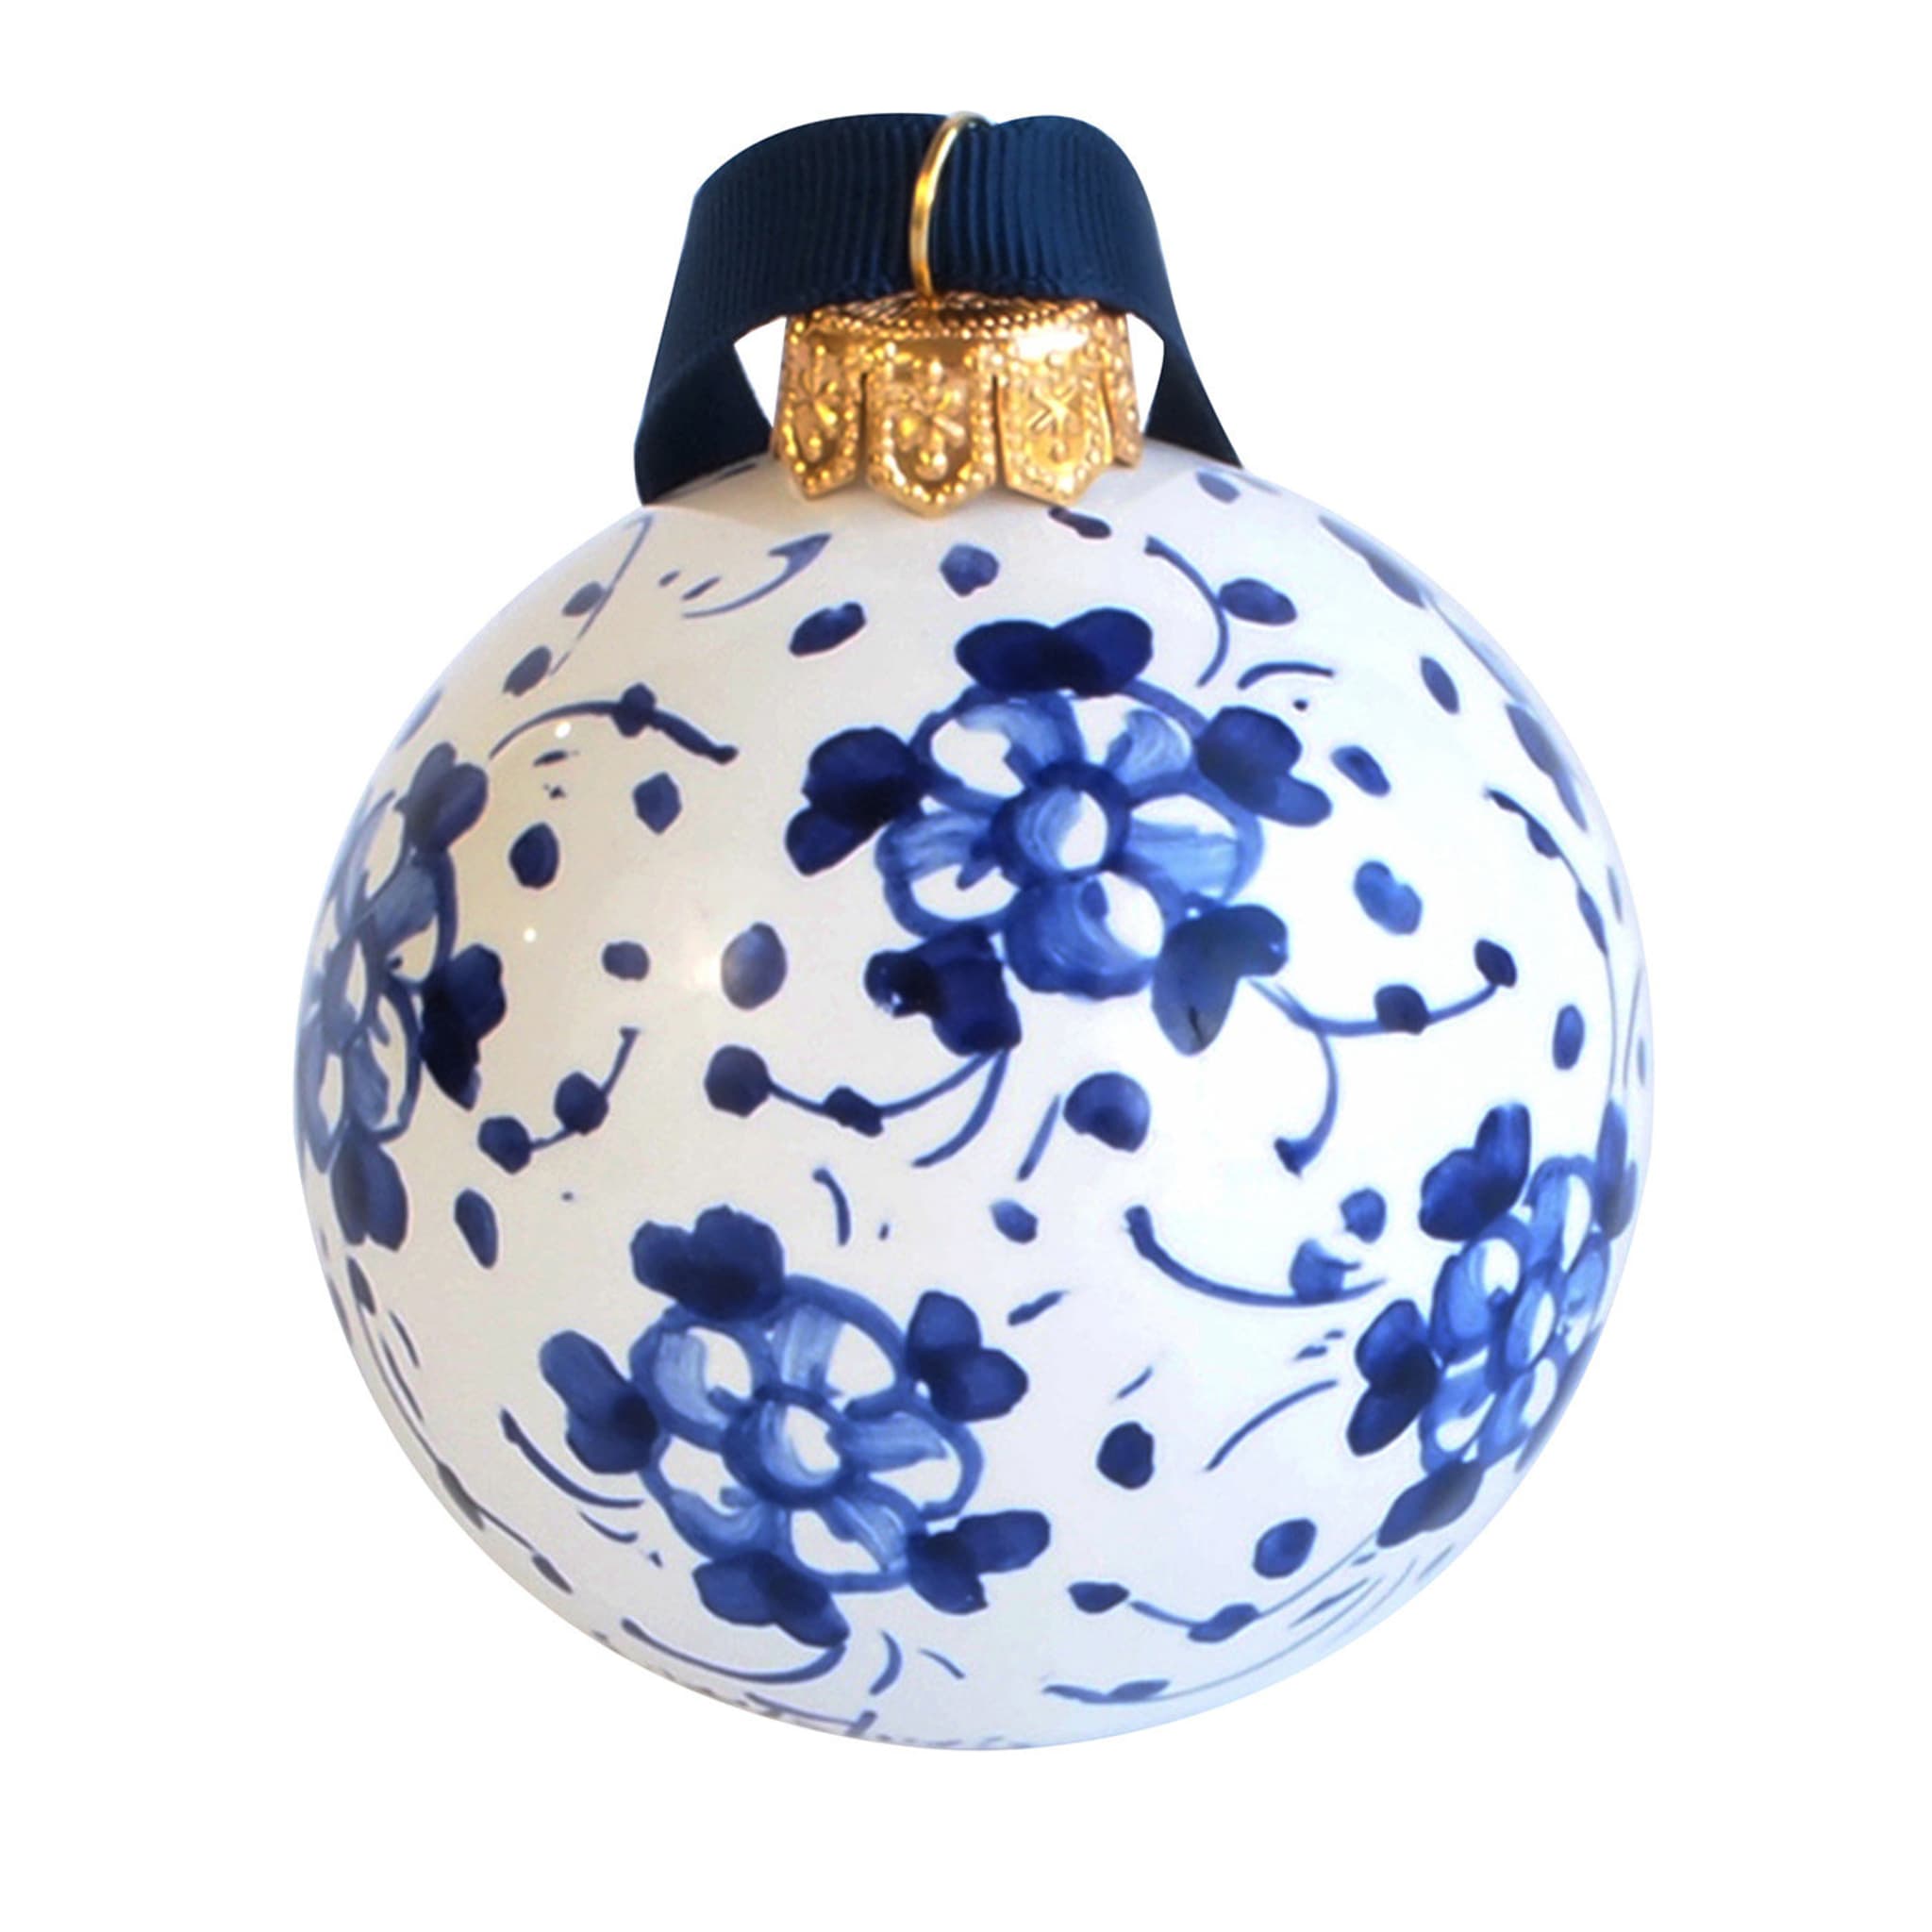 Blue Floral Christmas Ball Ornament #1 - Main view